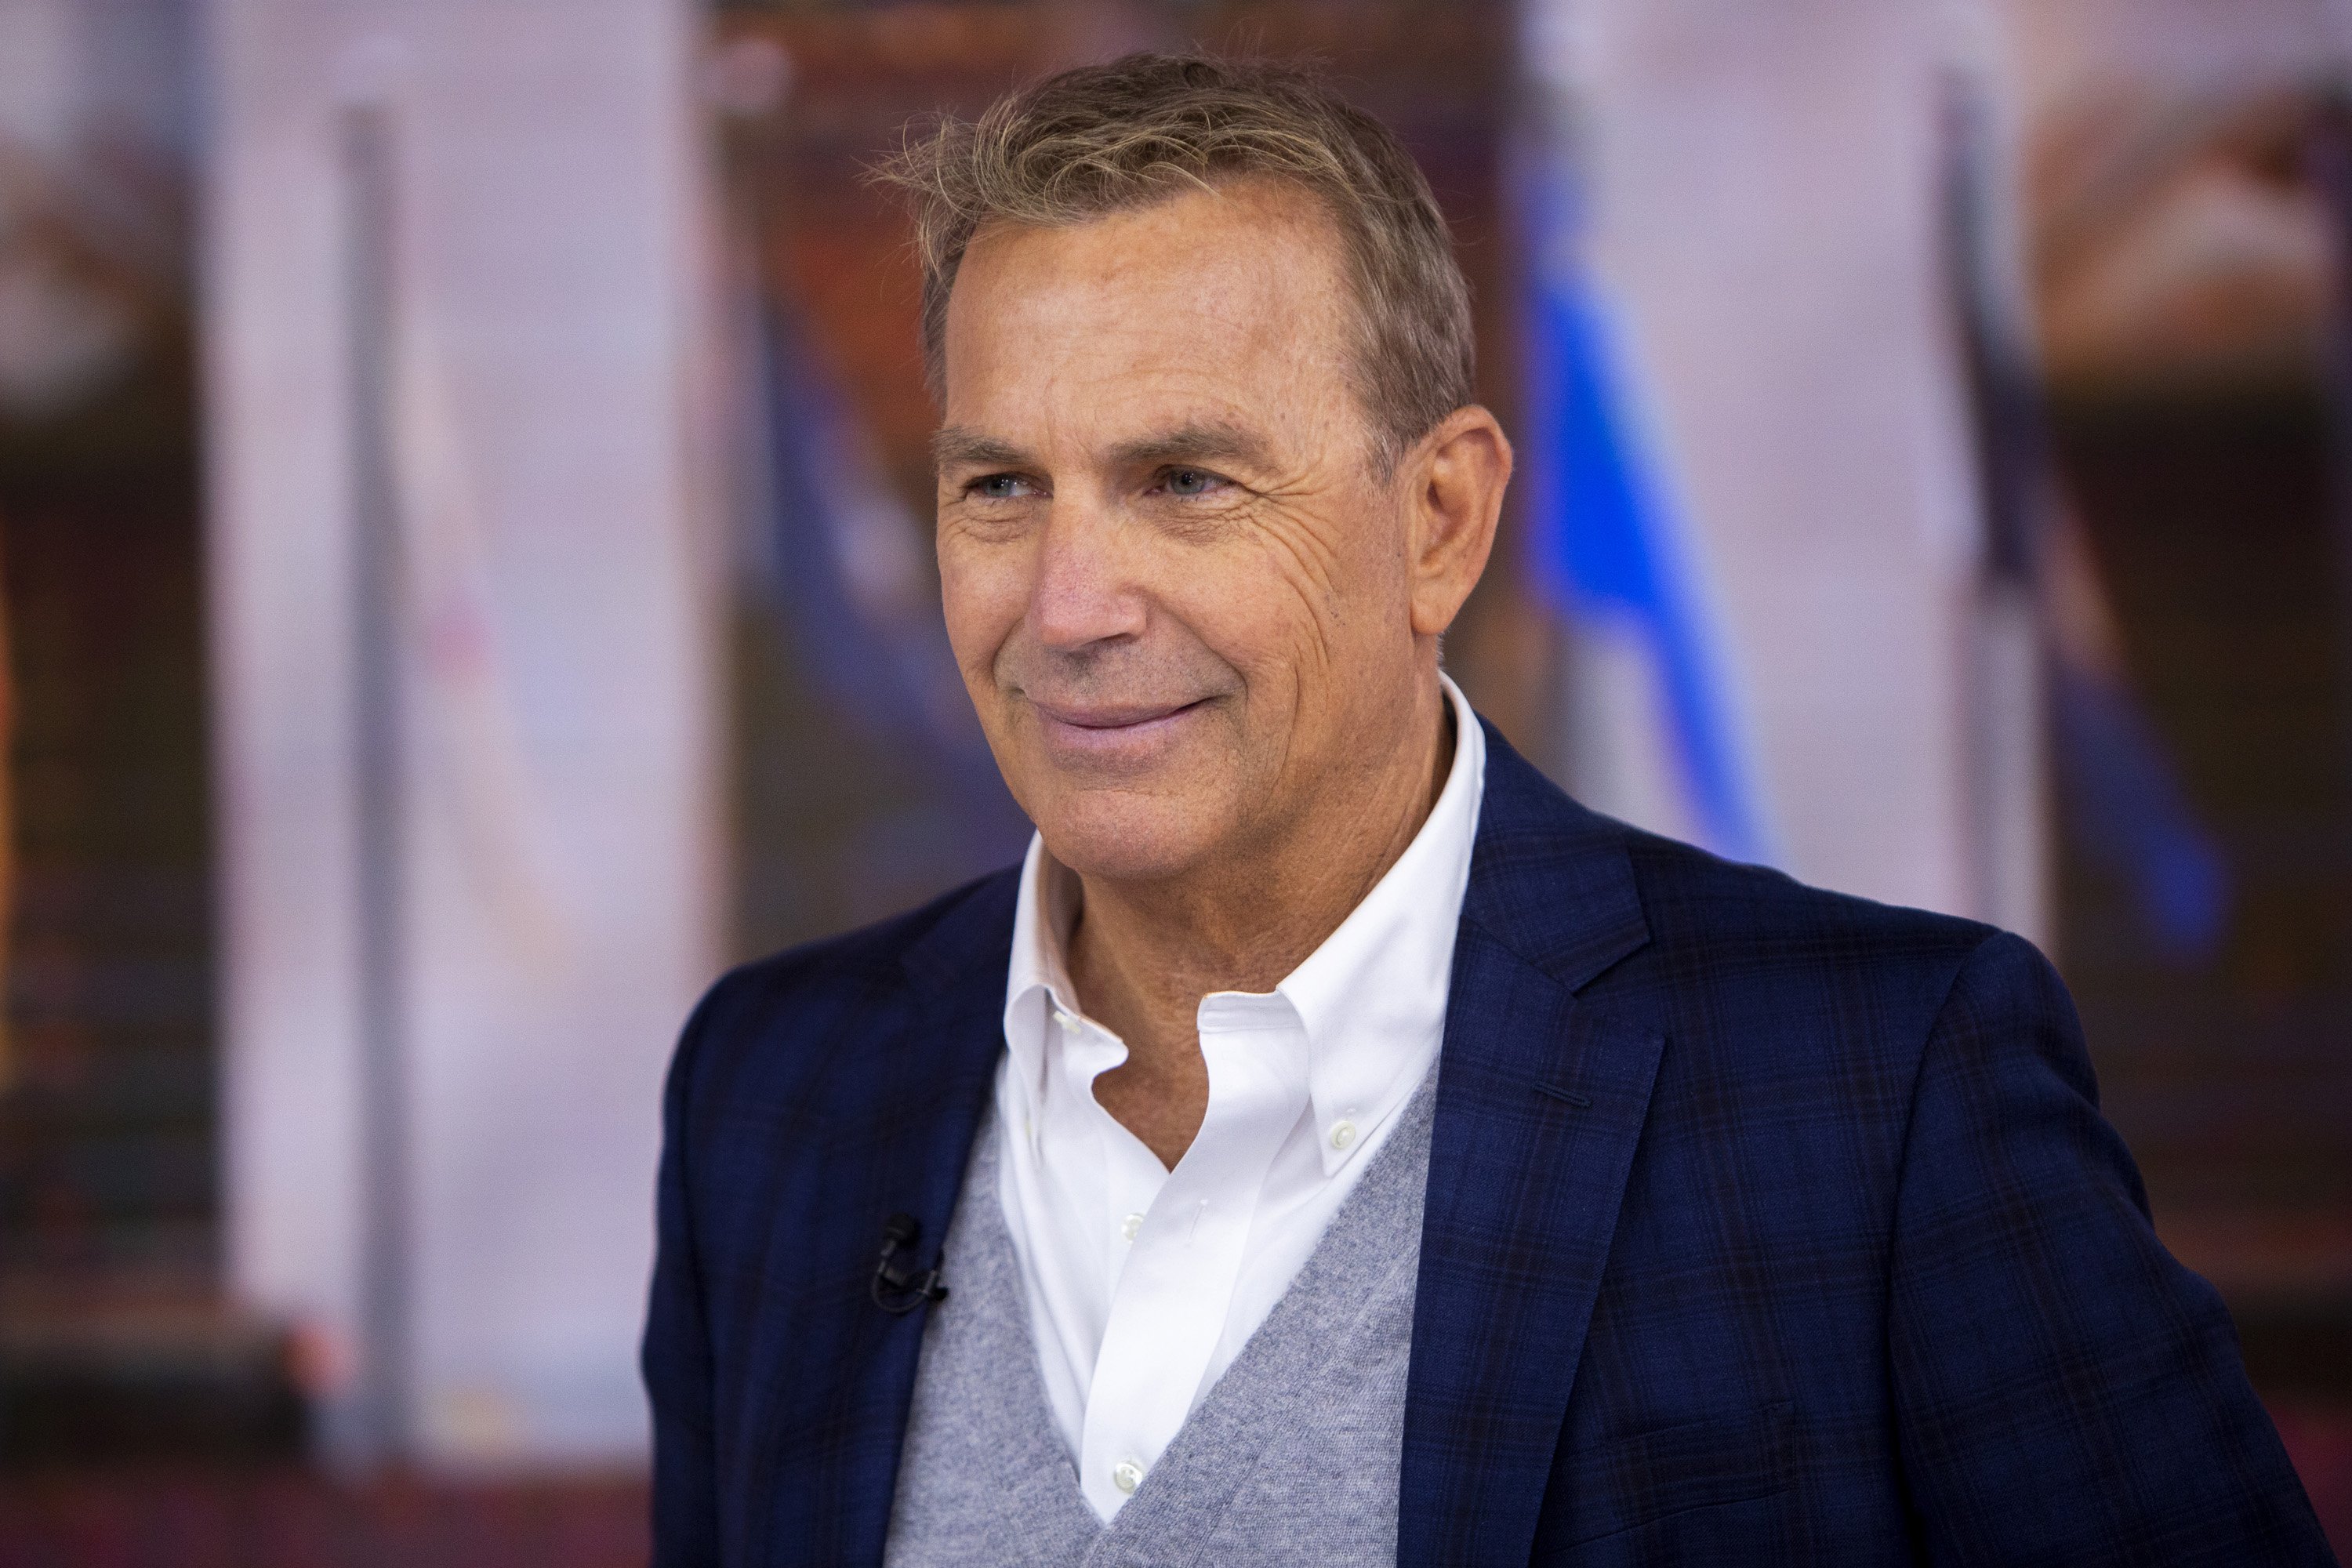 Kevin Costner pictured on Thursday, March 28, 2019. | Source: Getty Images.